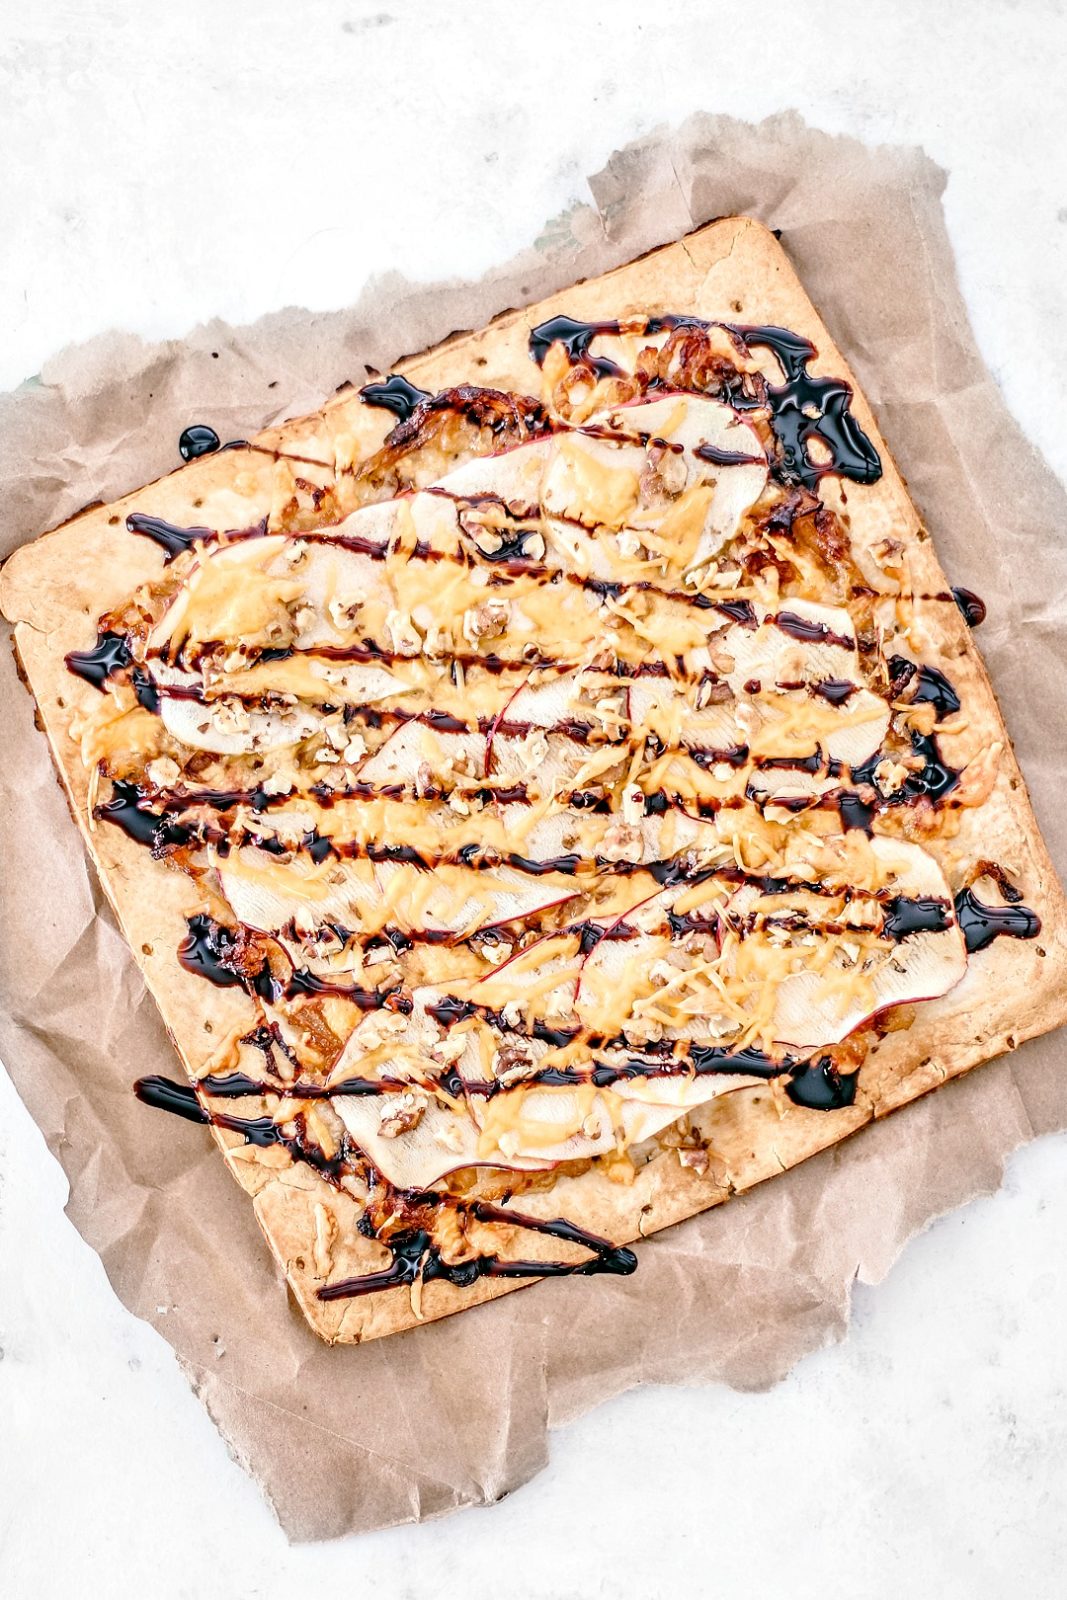 Apple Cheddar Flatbread drizzled with balsamic